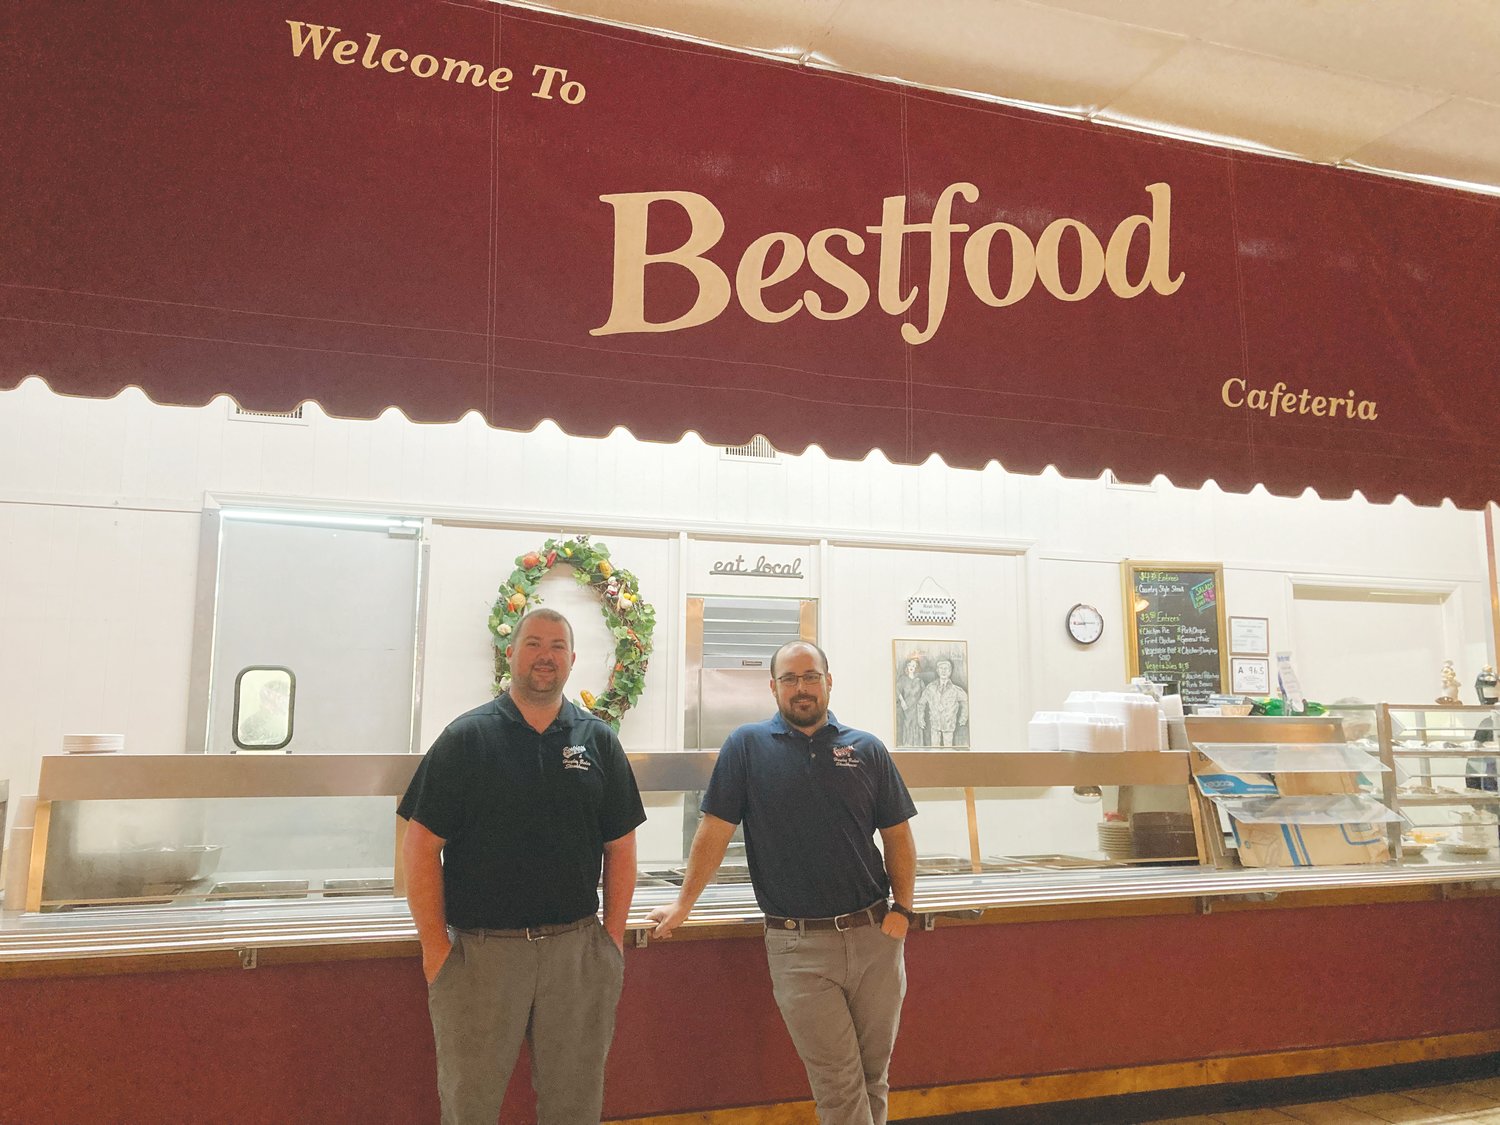 Tyler White and Chris Terry have taken over their fathers' businesses to continue their legacy.